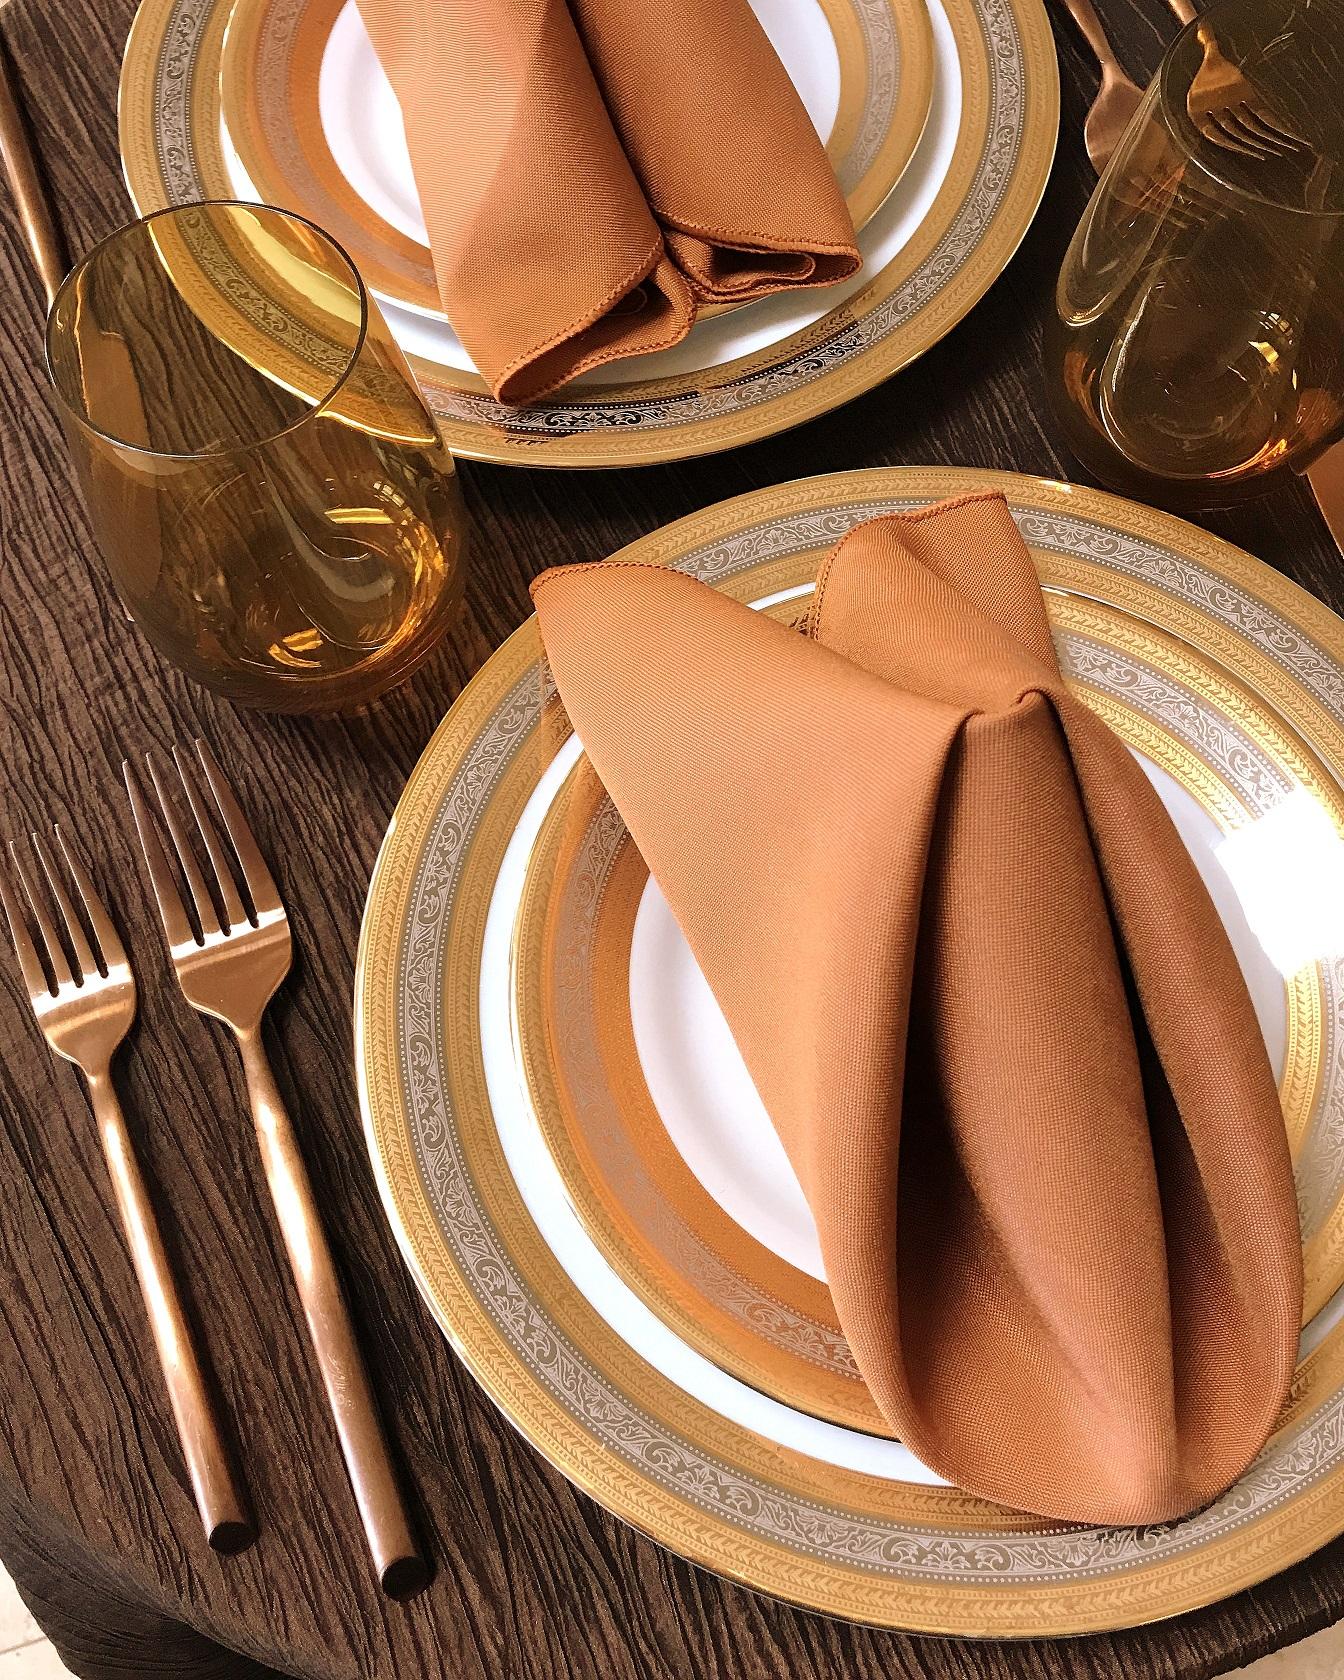 Thanksgiving Tabletop Trends Forecast!